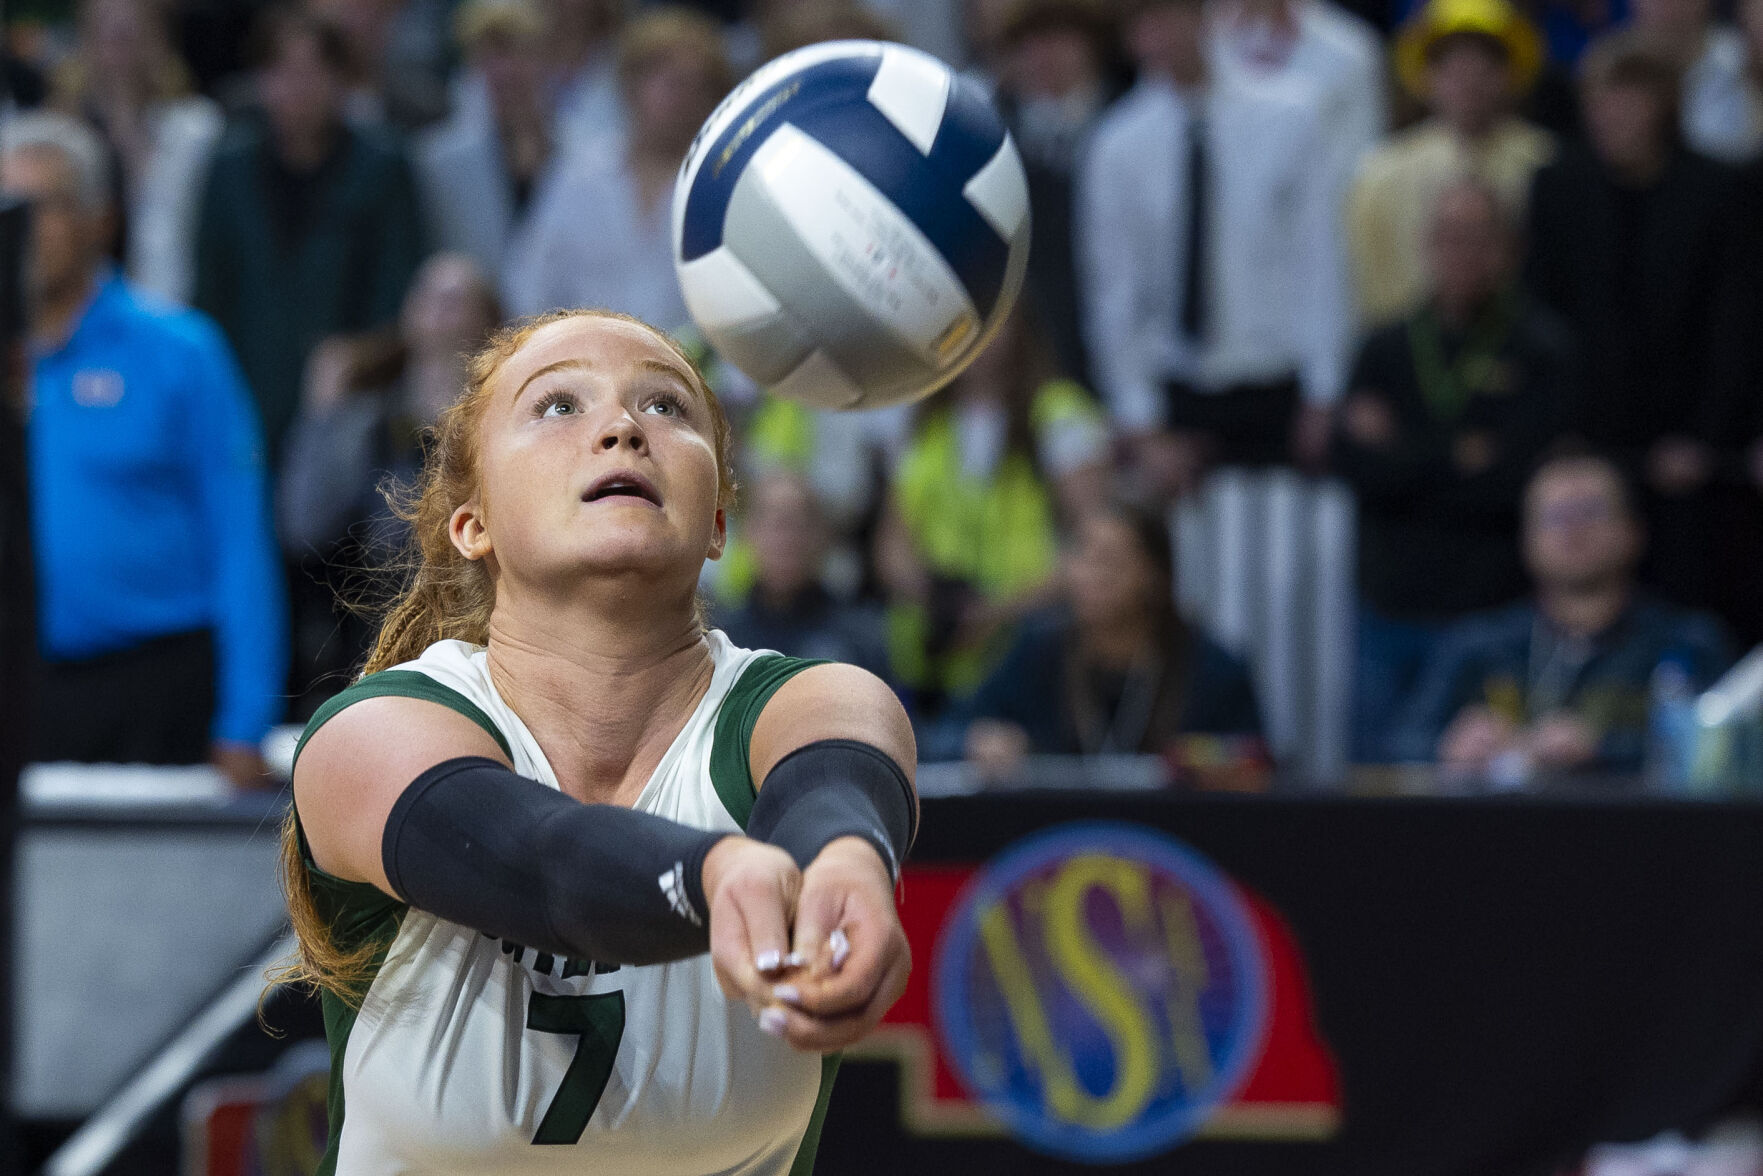 Exciting Matchups Set for Semifinal Friday at Nebraska State Volleyball Tournament